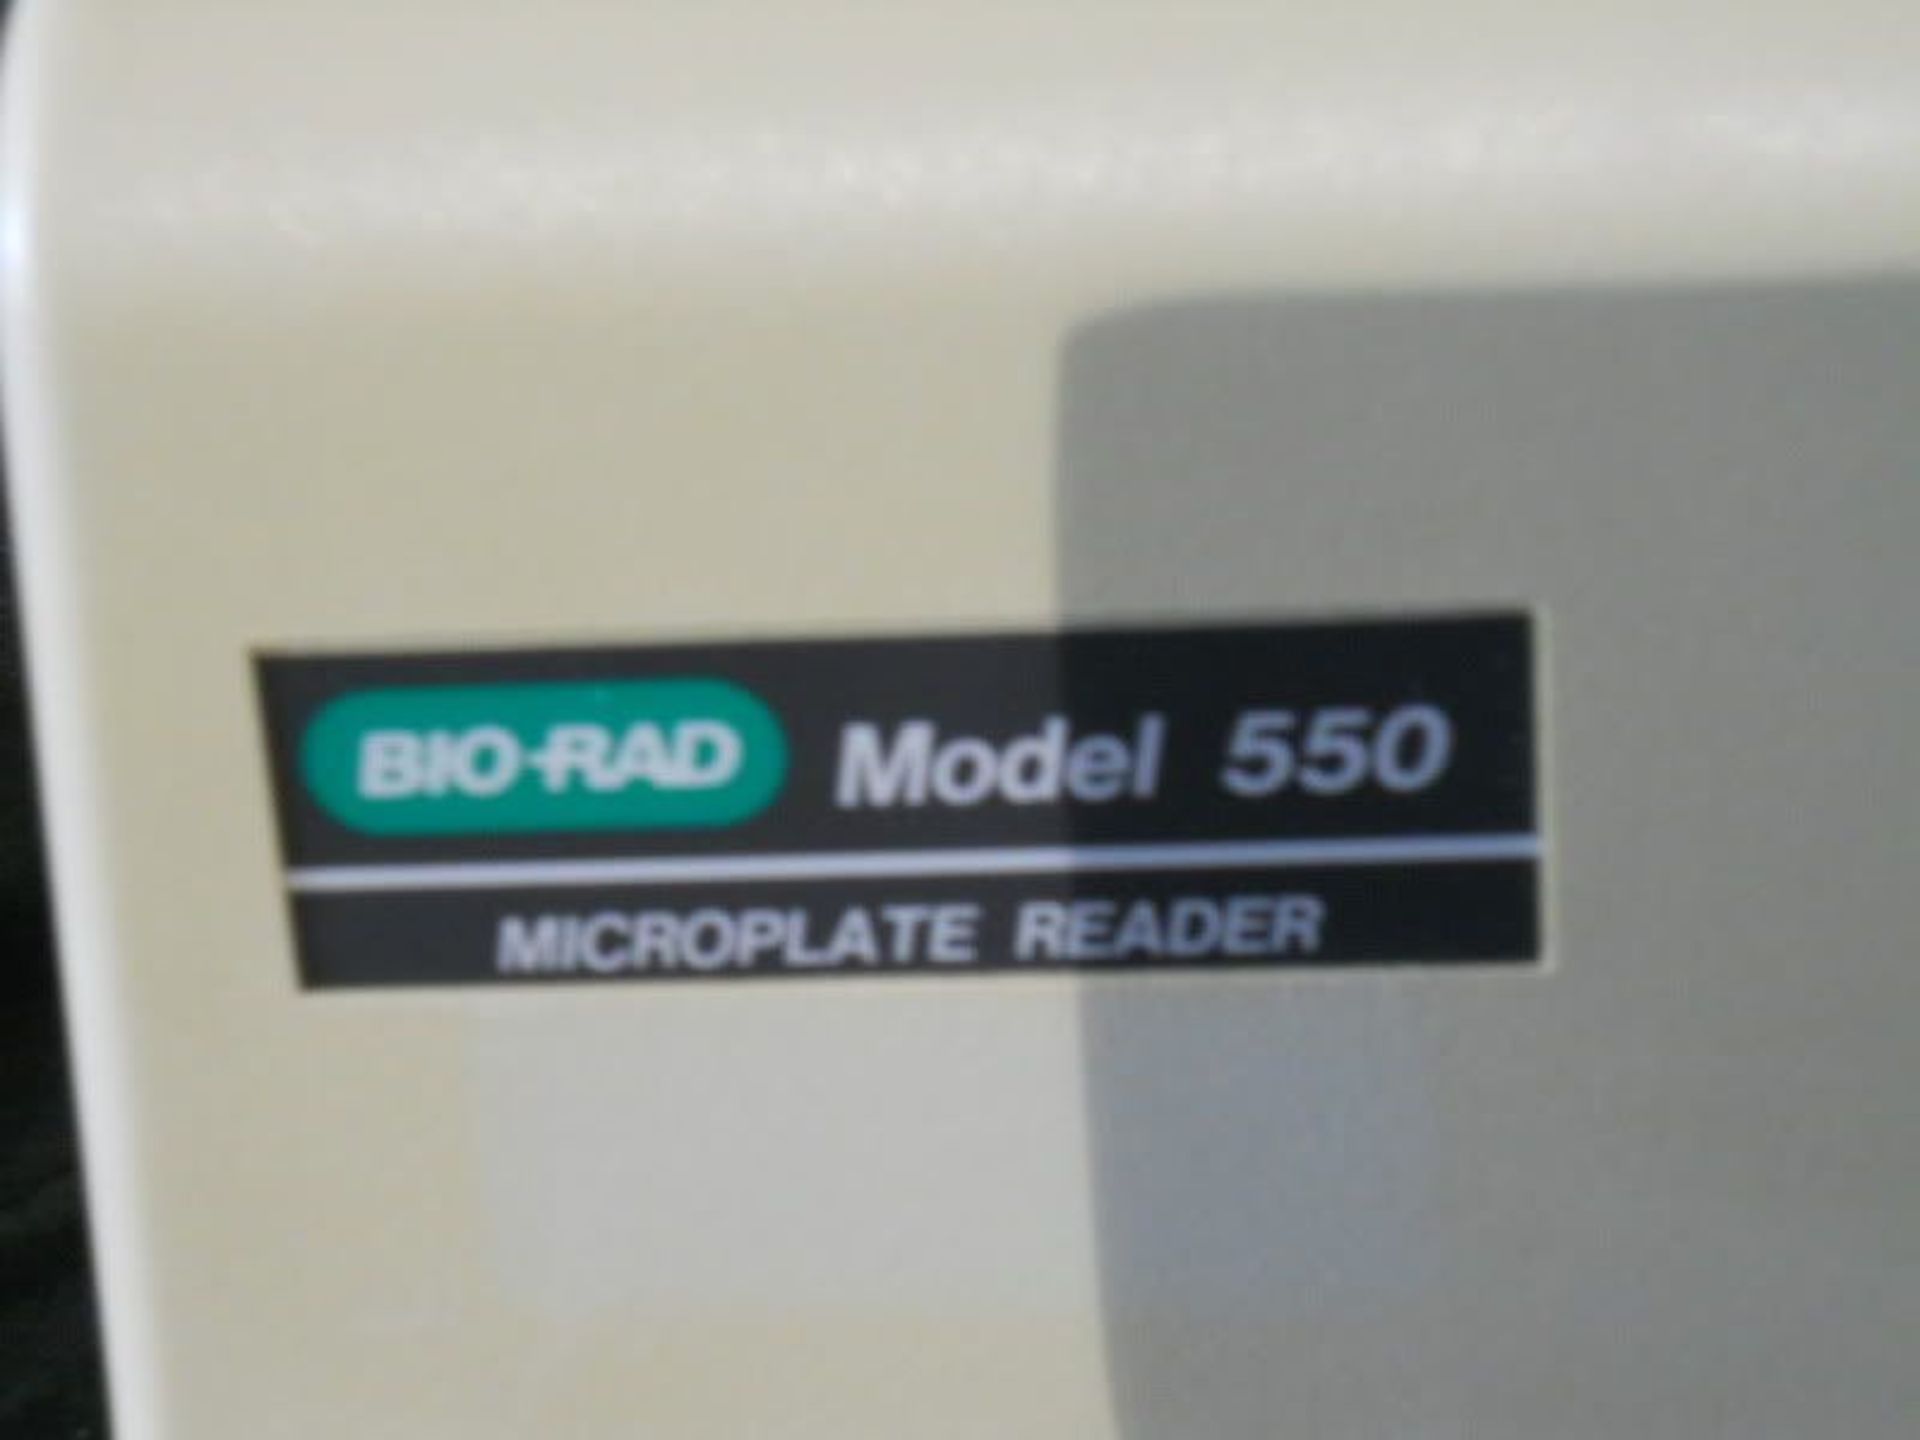 Bio Rad Microplate Reader Model 550 (Parts), Qty 1, 330812933938 - Image 2 of 10